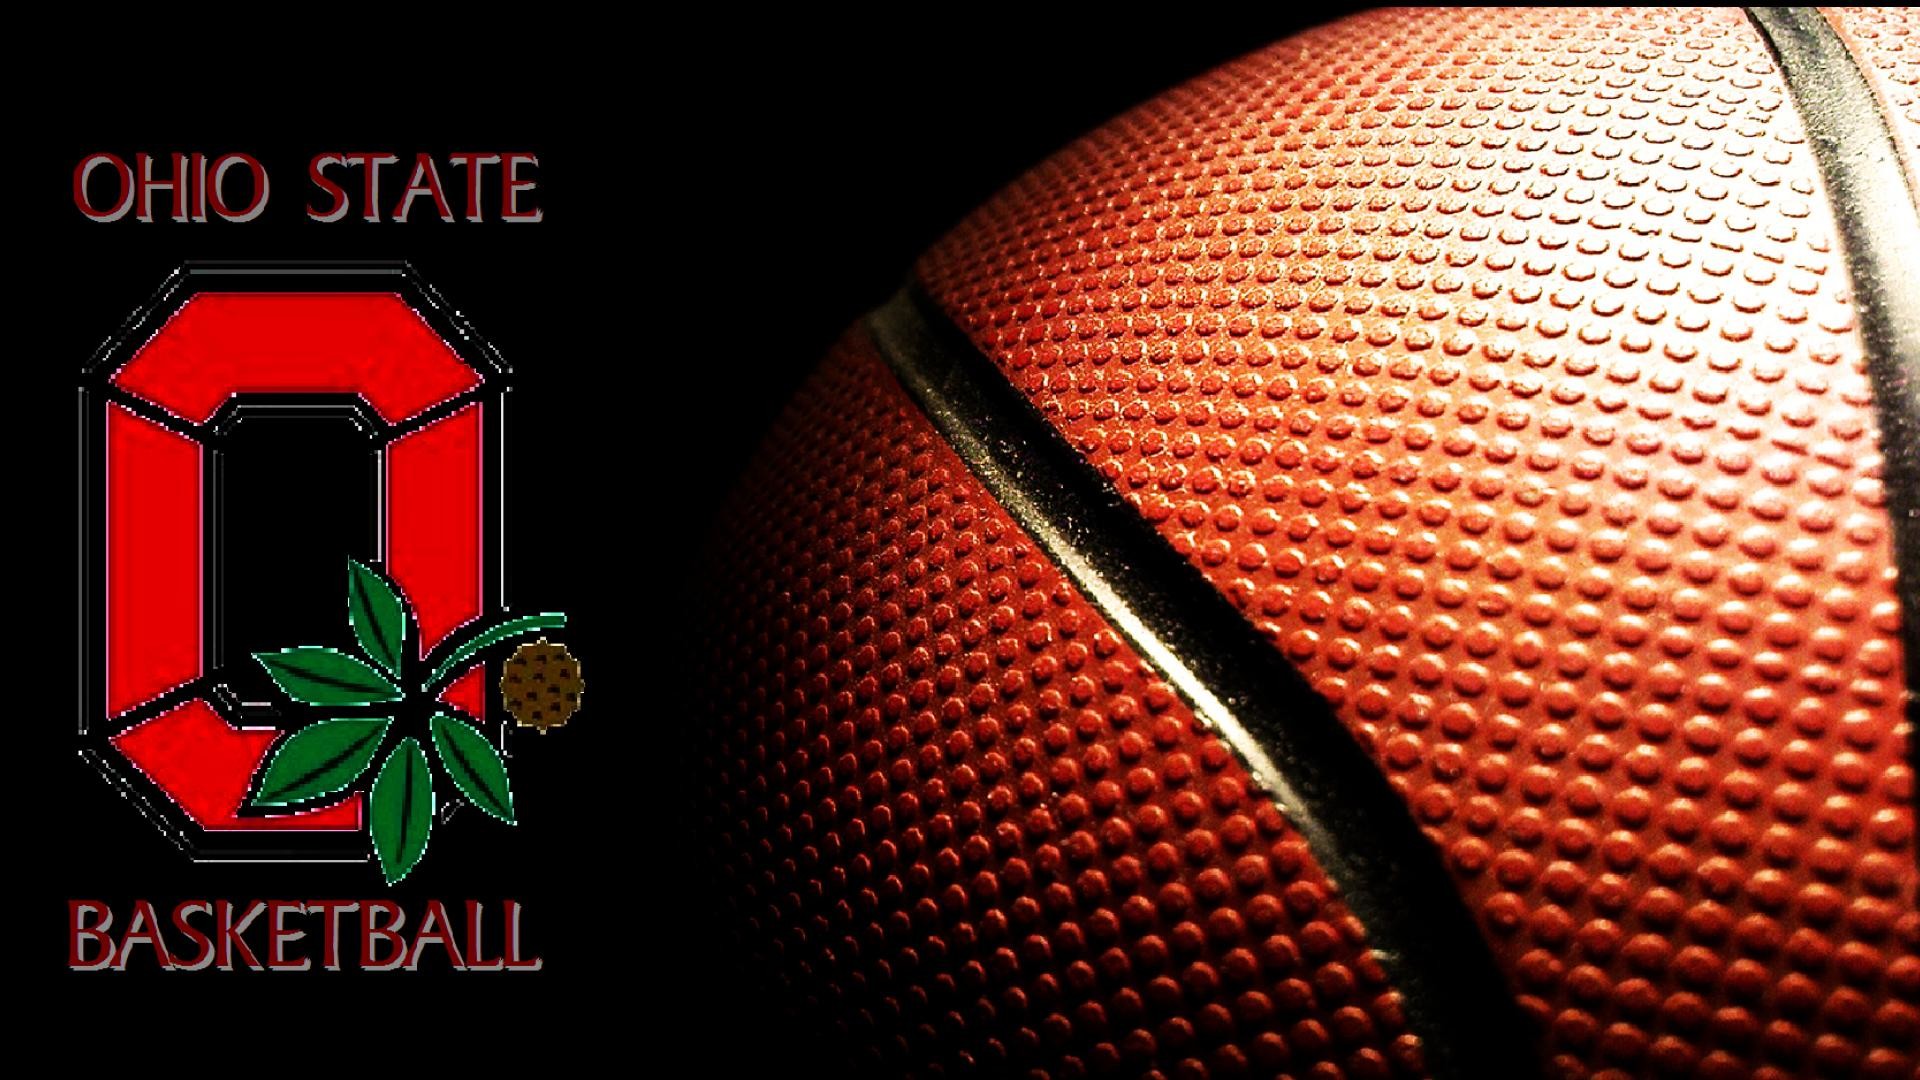 1920x1080 Ohio State Basketball Wallpapers - Wallpaper Cave